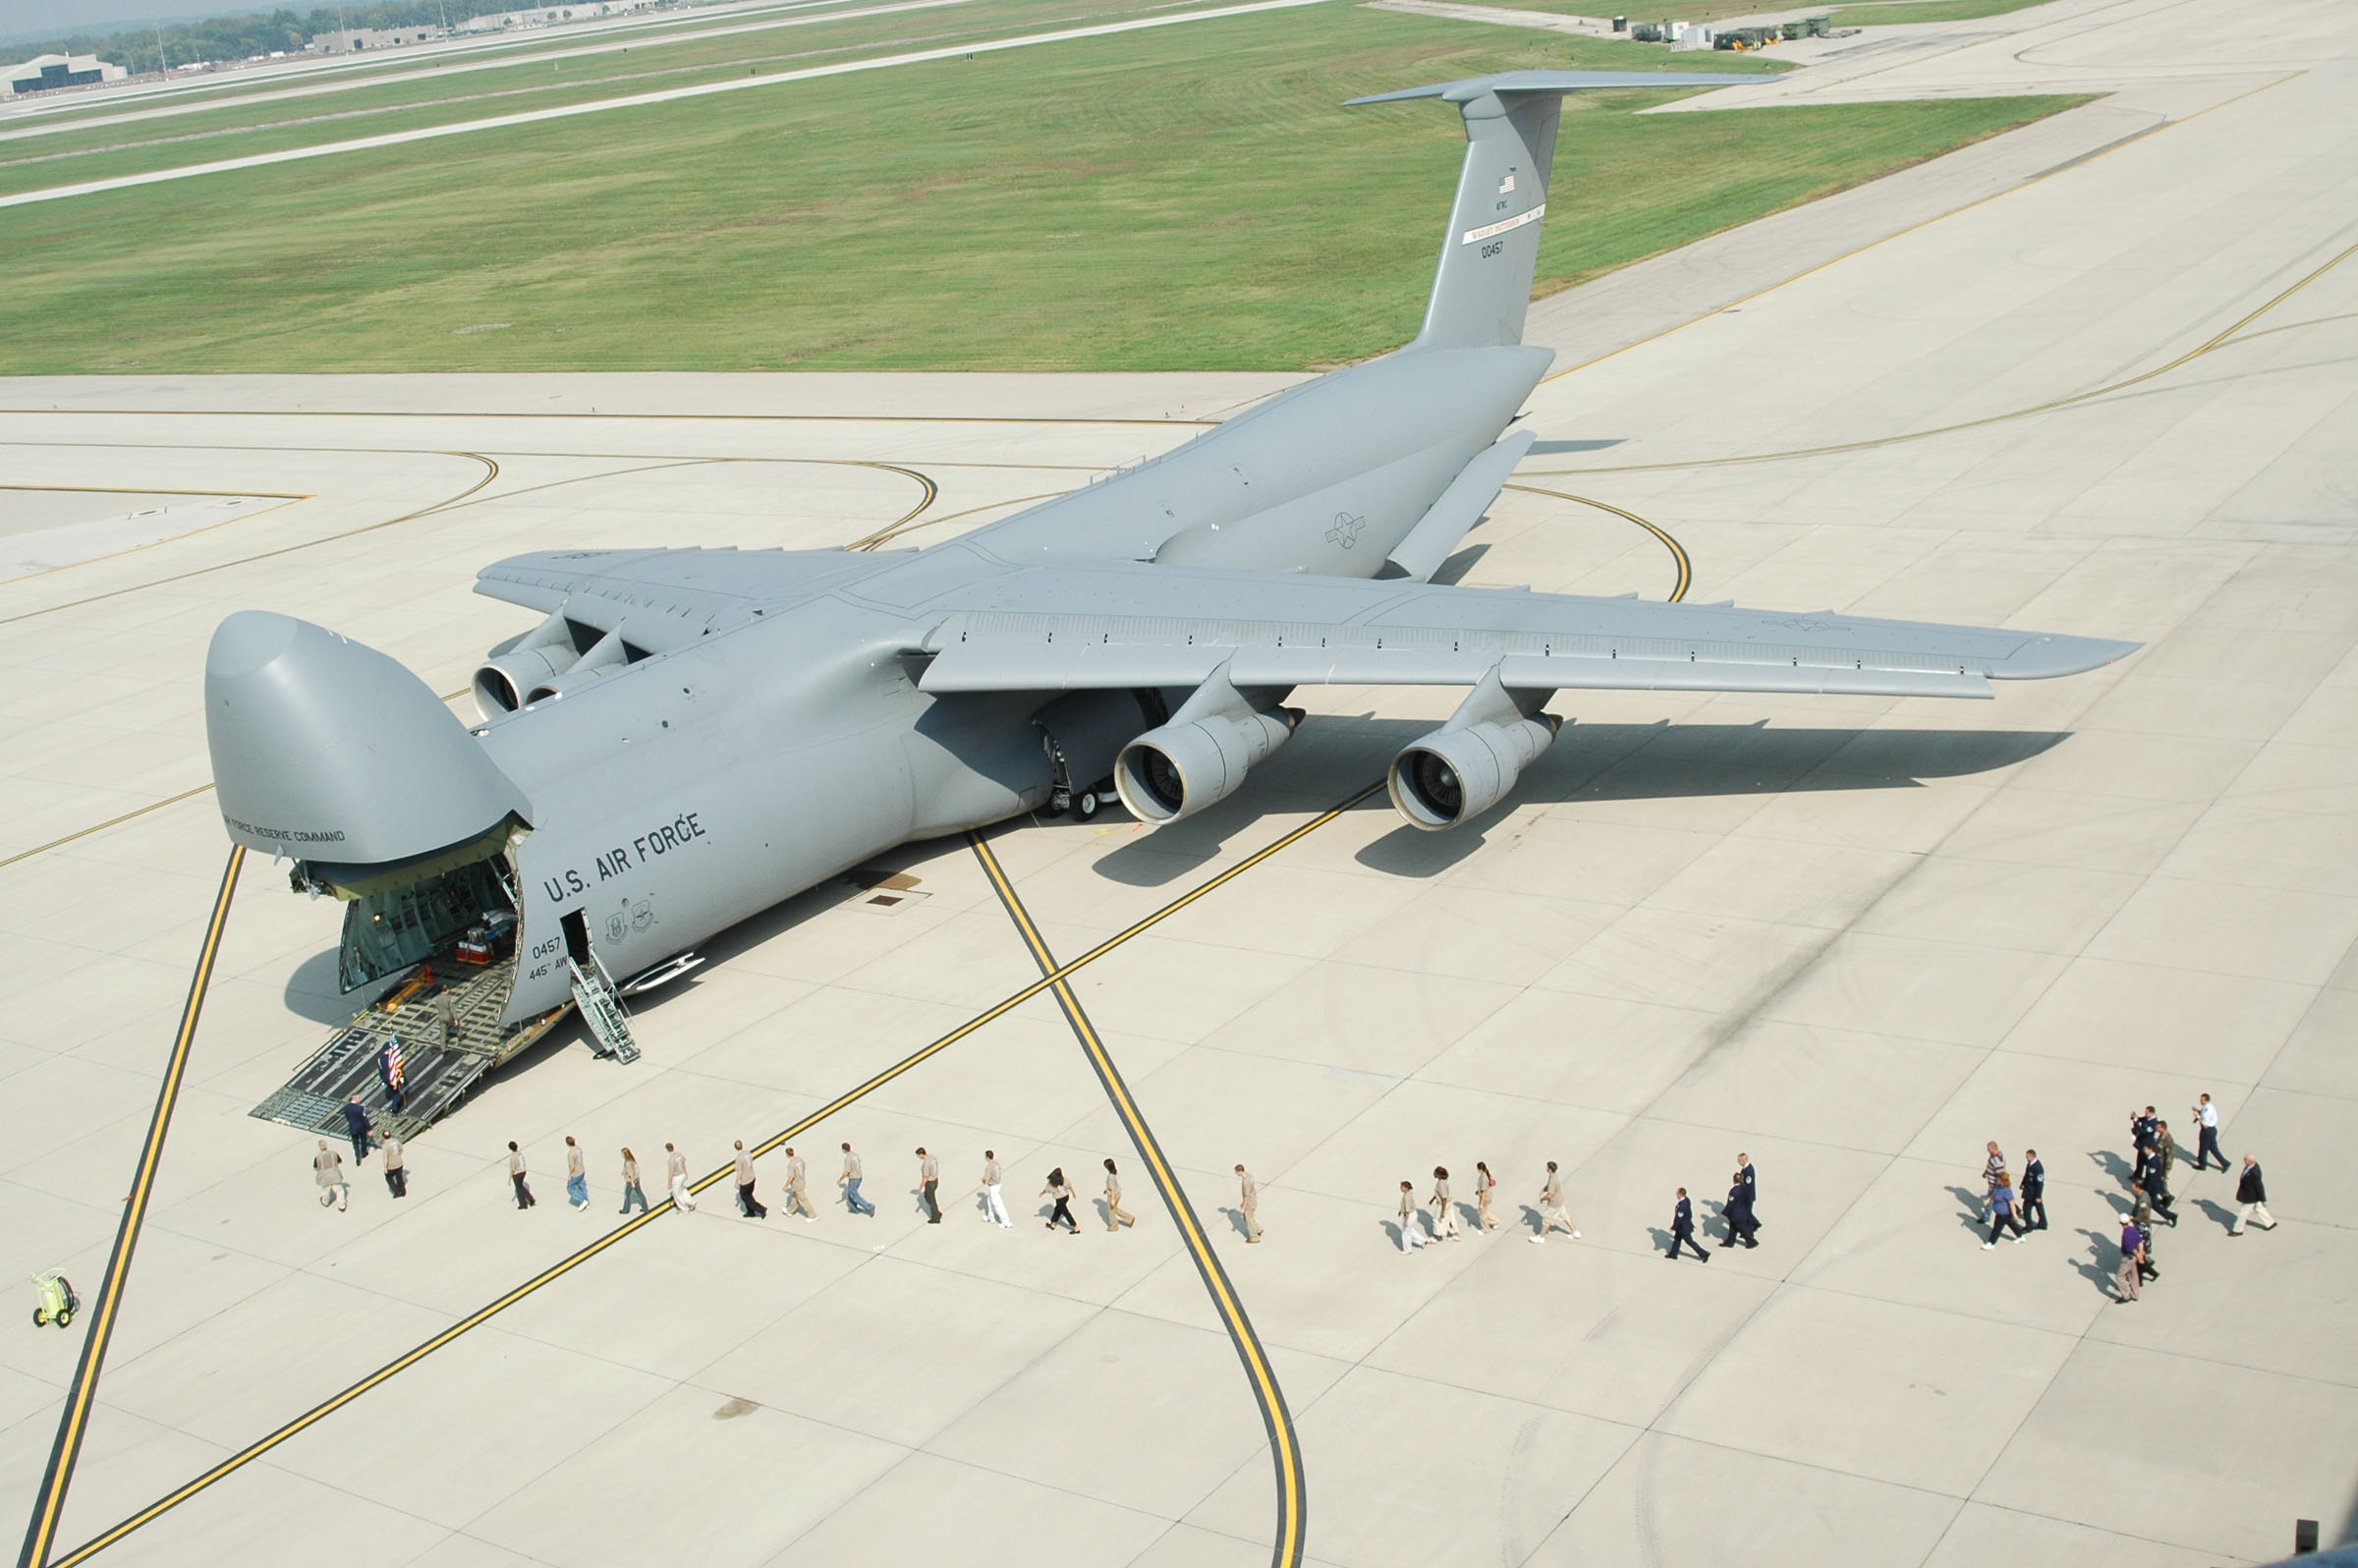 People look like ants compared to the C-5.